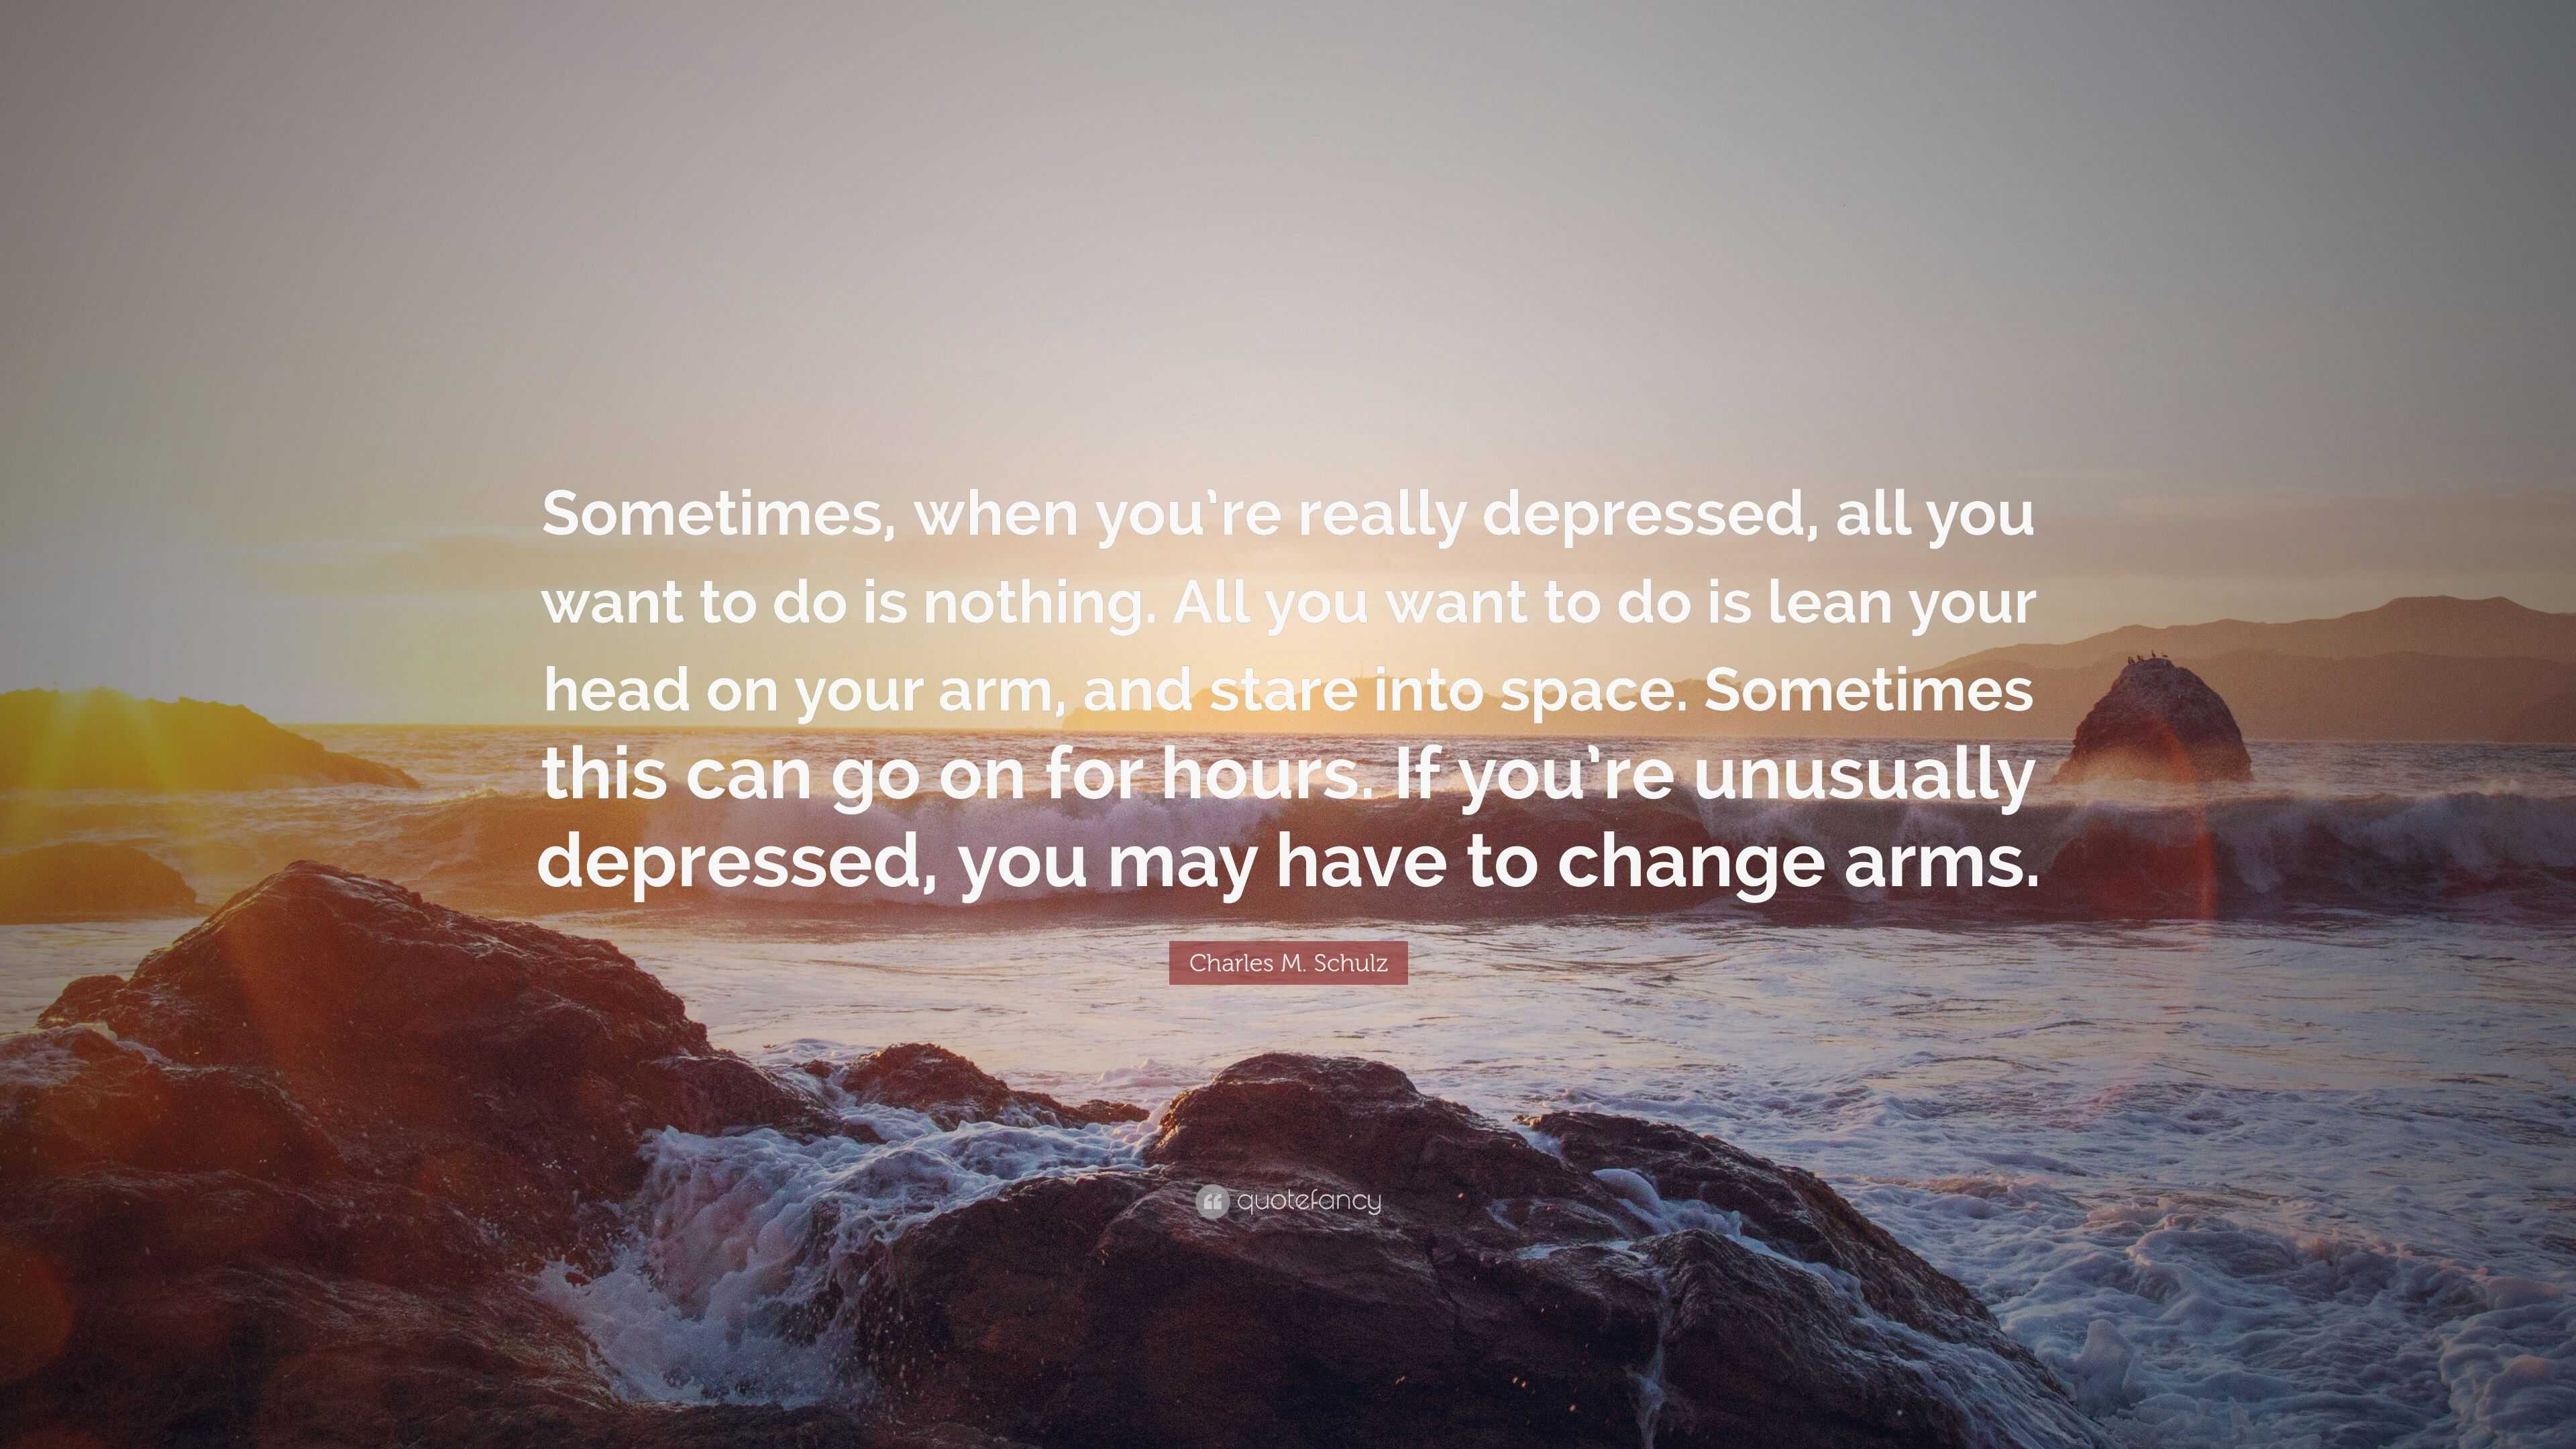 Charles M. Schulz Quote: “Sometimes, when you’re really depressed, all ...